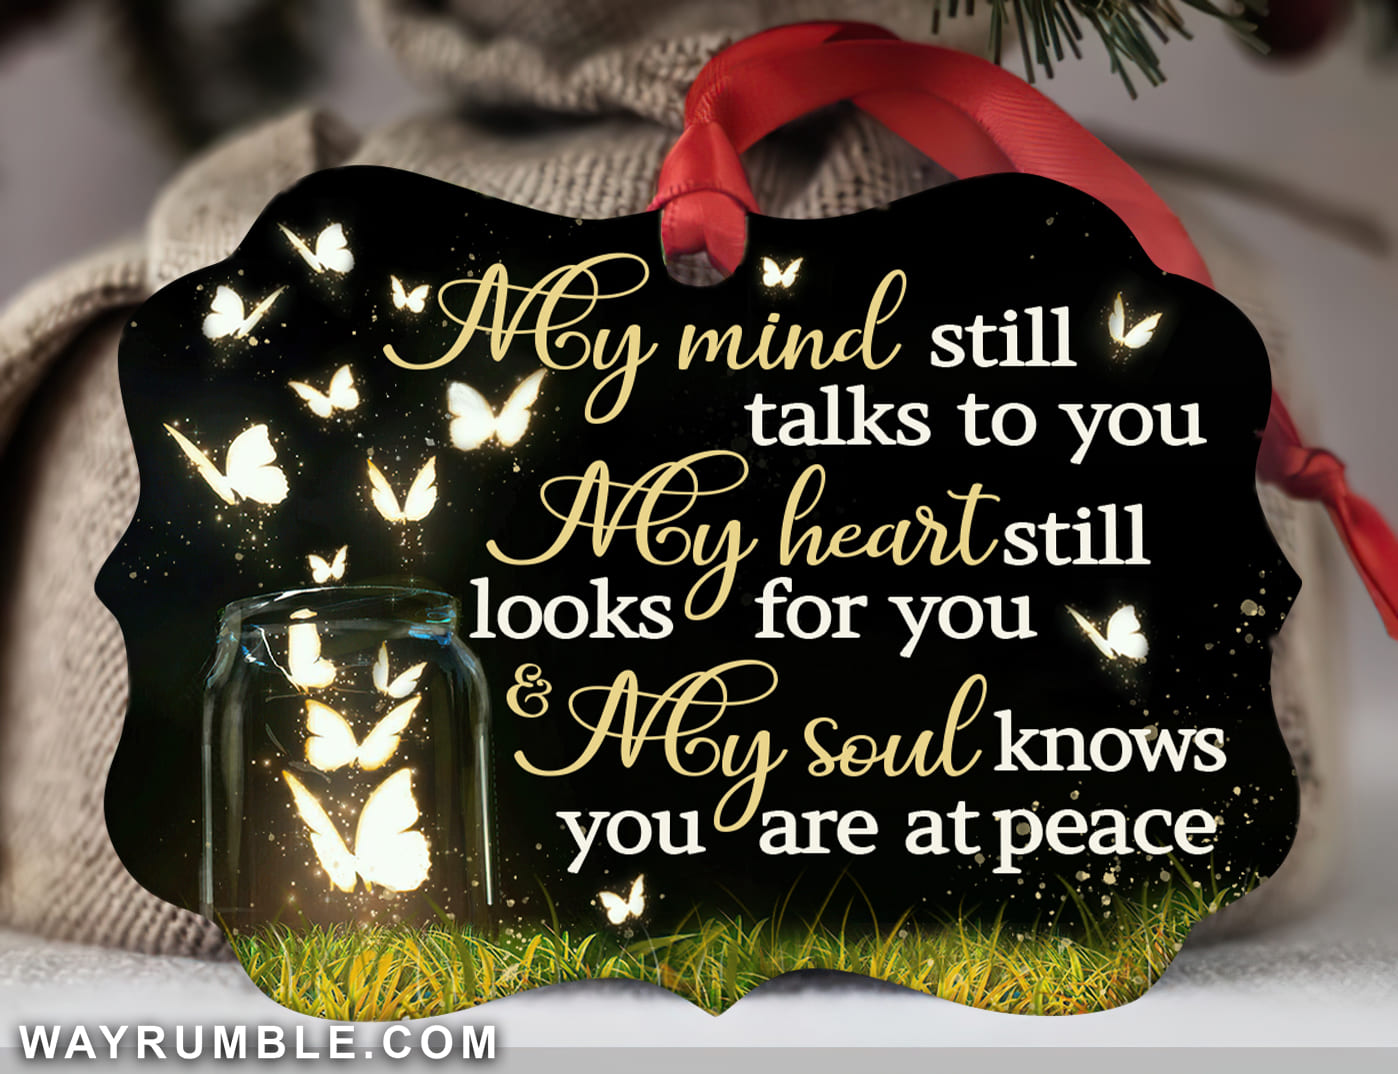 Heaven - Glowing butterflies in mason jar - My soul knows you are at peace - Aluminum Ornament